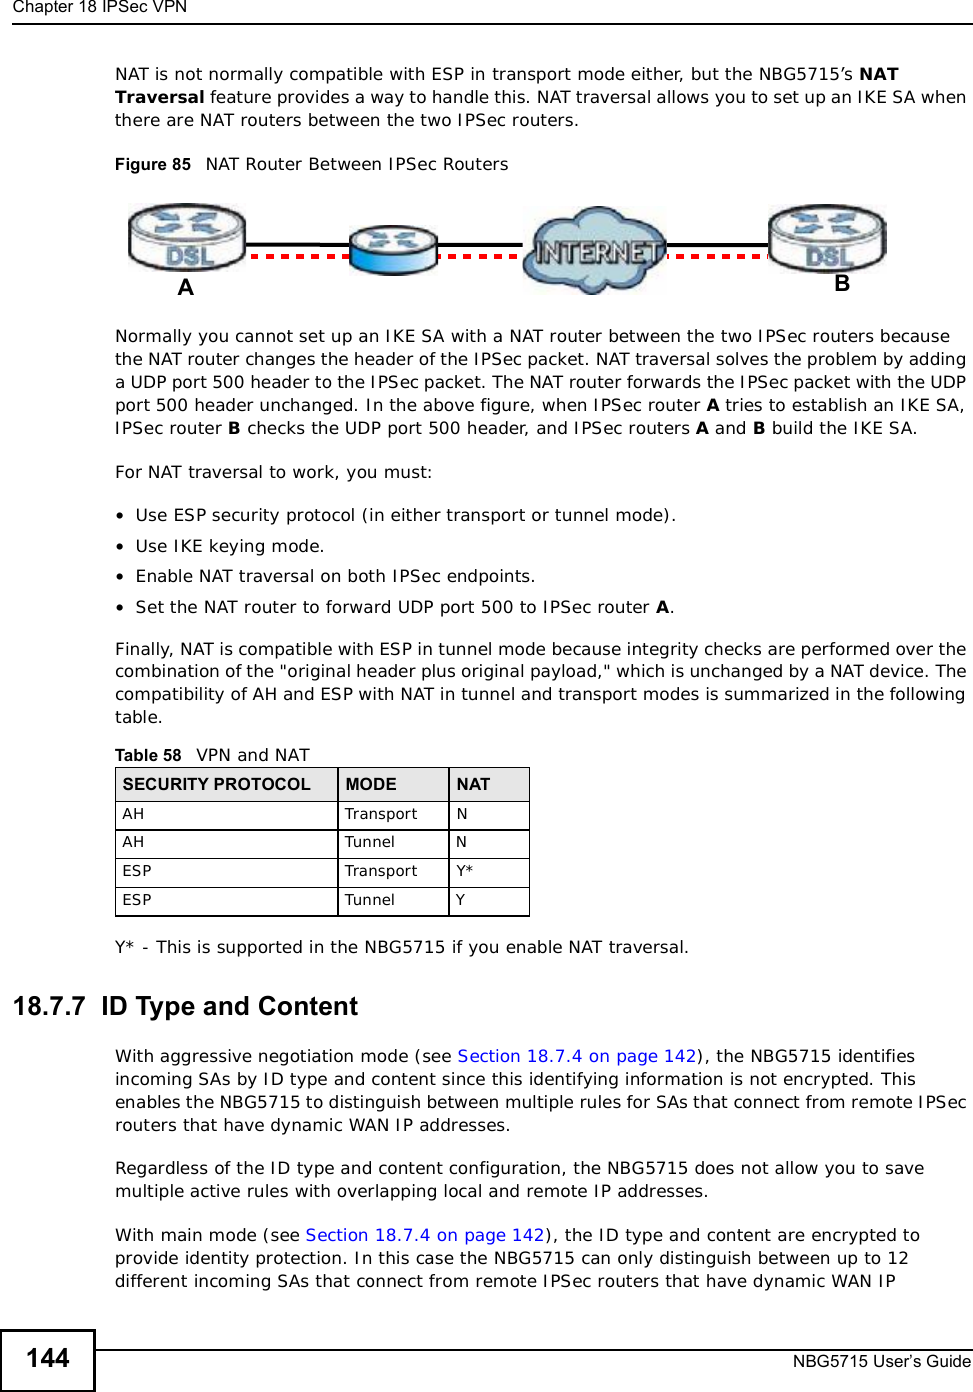 Chapter 18IPSec VPNNBG5715 User’s Guide144NAT is not normally compatible with ESP in transport mode either, but the NBG5715’s NATTraversal feature provides a way to handle this. NAT traversal allows you to set up an IKE SA when there are NAT routers between the two IPSec routers.Figure 85   NAT Router Between IPSec RoutersNormally you cannot set up an IKE SA with a NAT router between the two IPSec routers because the NAT router changes the header of the IPSec packet. NAT traversal solves the problem by adding a UDP port 500 header to the IPSec packet. The NAT router forwards the IPSec packet with the UDP port 500 header unchanged. In the above figure, when IPSec router A tries to establish an IKE SA, IPSec router B checks the UDP port 500 header, and IPSec routers A and B build the IKE SA.For NAT traversal to work, you must:•Use ESP security protocol (in either transport or tunnel mode).•Use IKE keying mode.•Enable NAT traversal on both IPSec endpoints.•Set the NAT router to forward UDP port 500 to IPSec router A.Finally, NAT is compatible with ESP in tunnel mode because integrity checks are performed over the combination of the &quot;original header plus original payload,&quot; which is unchanged by a NAT device. The compatibility of AH and ESP with NAT in tunnel and transport modes is summarized in the following table.Y* - This is supported in the NBG5715 if you enable NAT traversal.18.7.7  ID Type and ContentWith aggressive negotiation mode (see Section 18.7.4 on page 142), the NBG5715 identifies incoming SAs by ID type and content since this identifying information is not encrypted. This enables the NBG5715 to distinguish between multiple rules for SAs that connect from remote IPSec routers that have dynamic WAN IP addresses.Regardless of the ID type and content configuration, the NBG5715 does not allow you to save multiple active rules with overlapping local and remote IP addresses.With main mode (see Section 18.7.4 on page 142), the ID type and content are encrypted to provide identity protection. In this case the NBG5715 can only distinguish between up to 12 different incoming SAs that connect from remote IPSec routers that have dynamic WAN IP Table 58   VPN and NATSECURITY PROTOCOL MODE NATAHTransportNAHTunnelNESPTransportY*ESPTunnelYAB